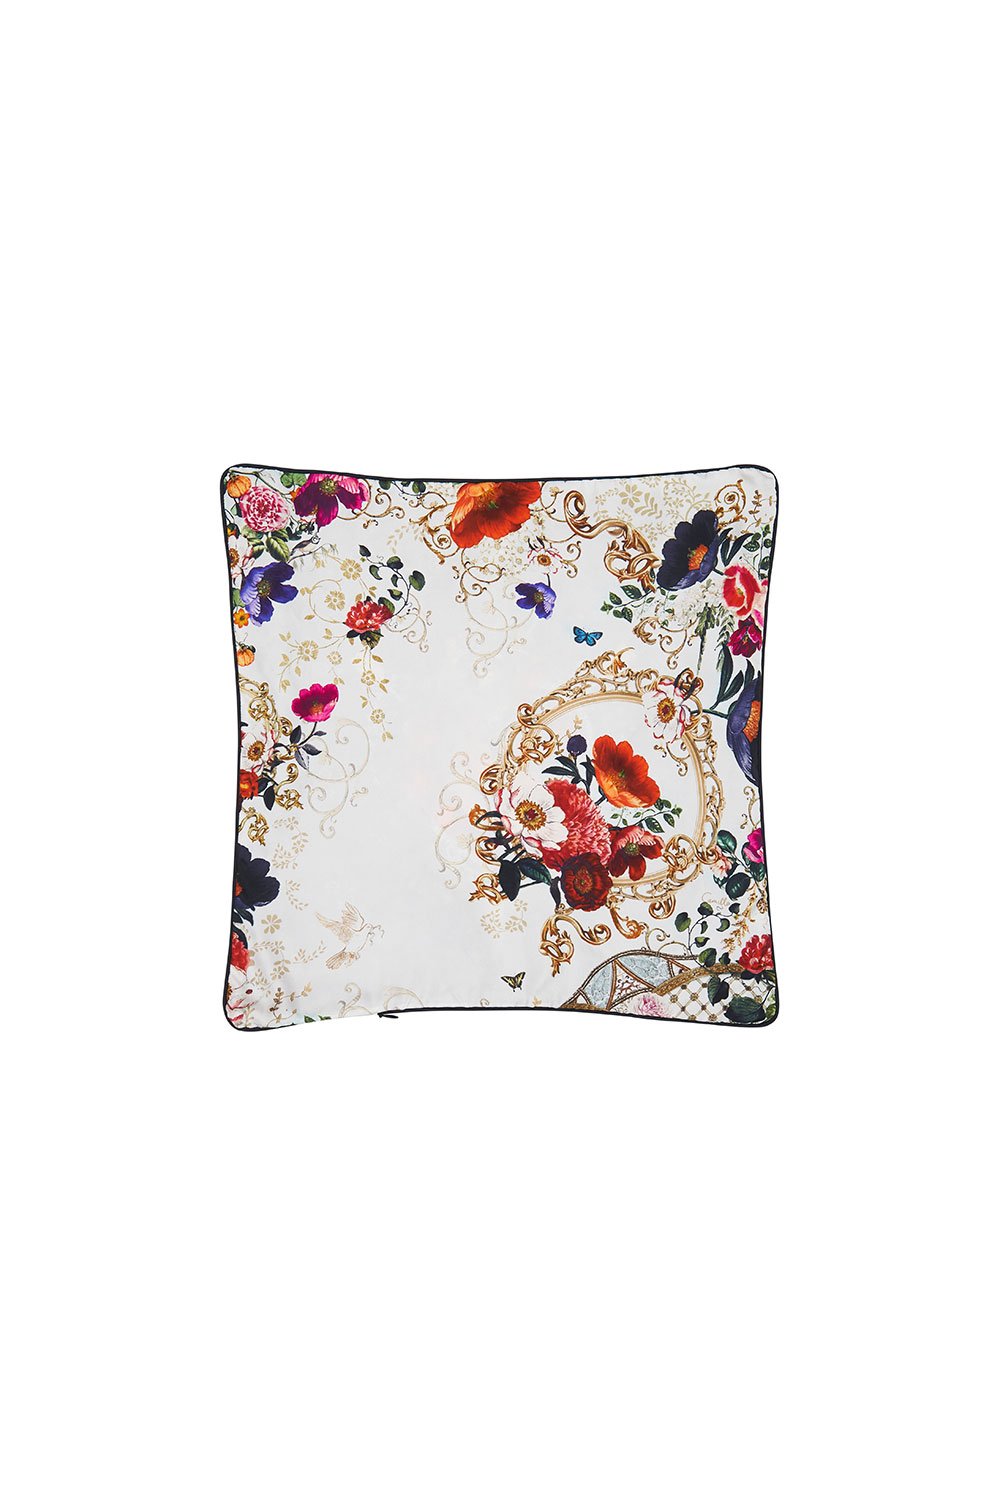 SMALL SQUARE CUSHION FAIRY GODMOTHER